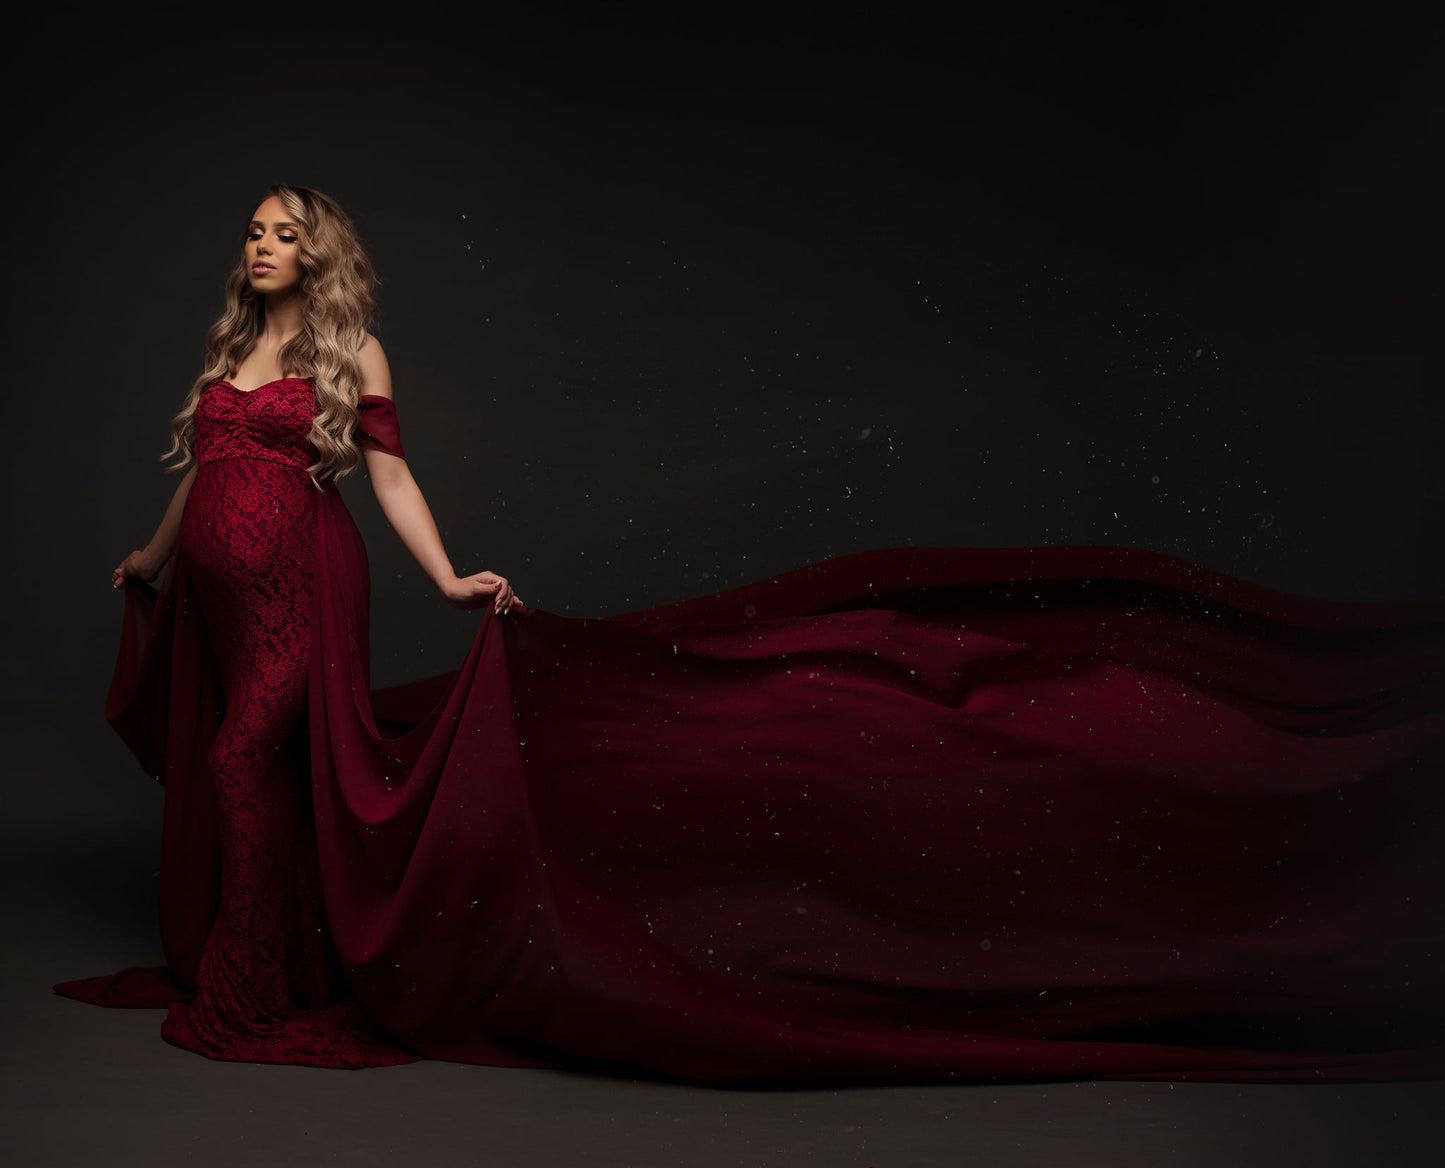 Red Lace Papoula Gown - maternity photoshoot dress